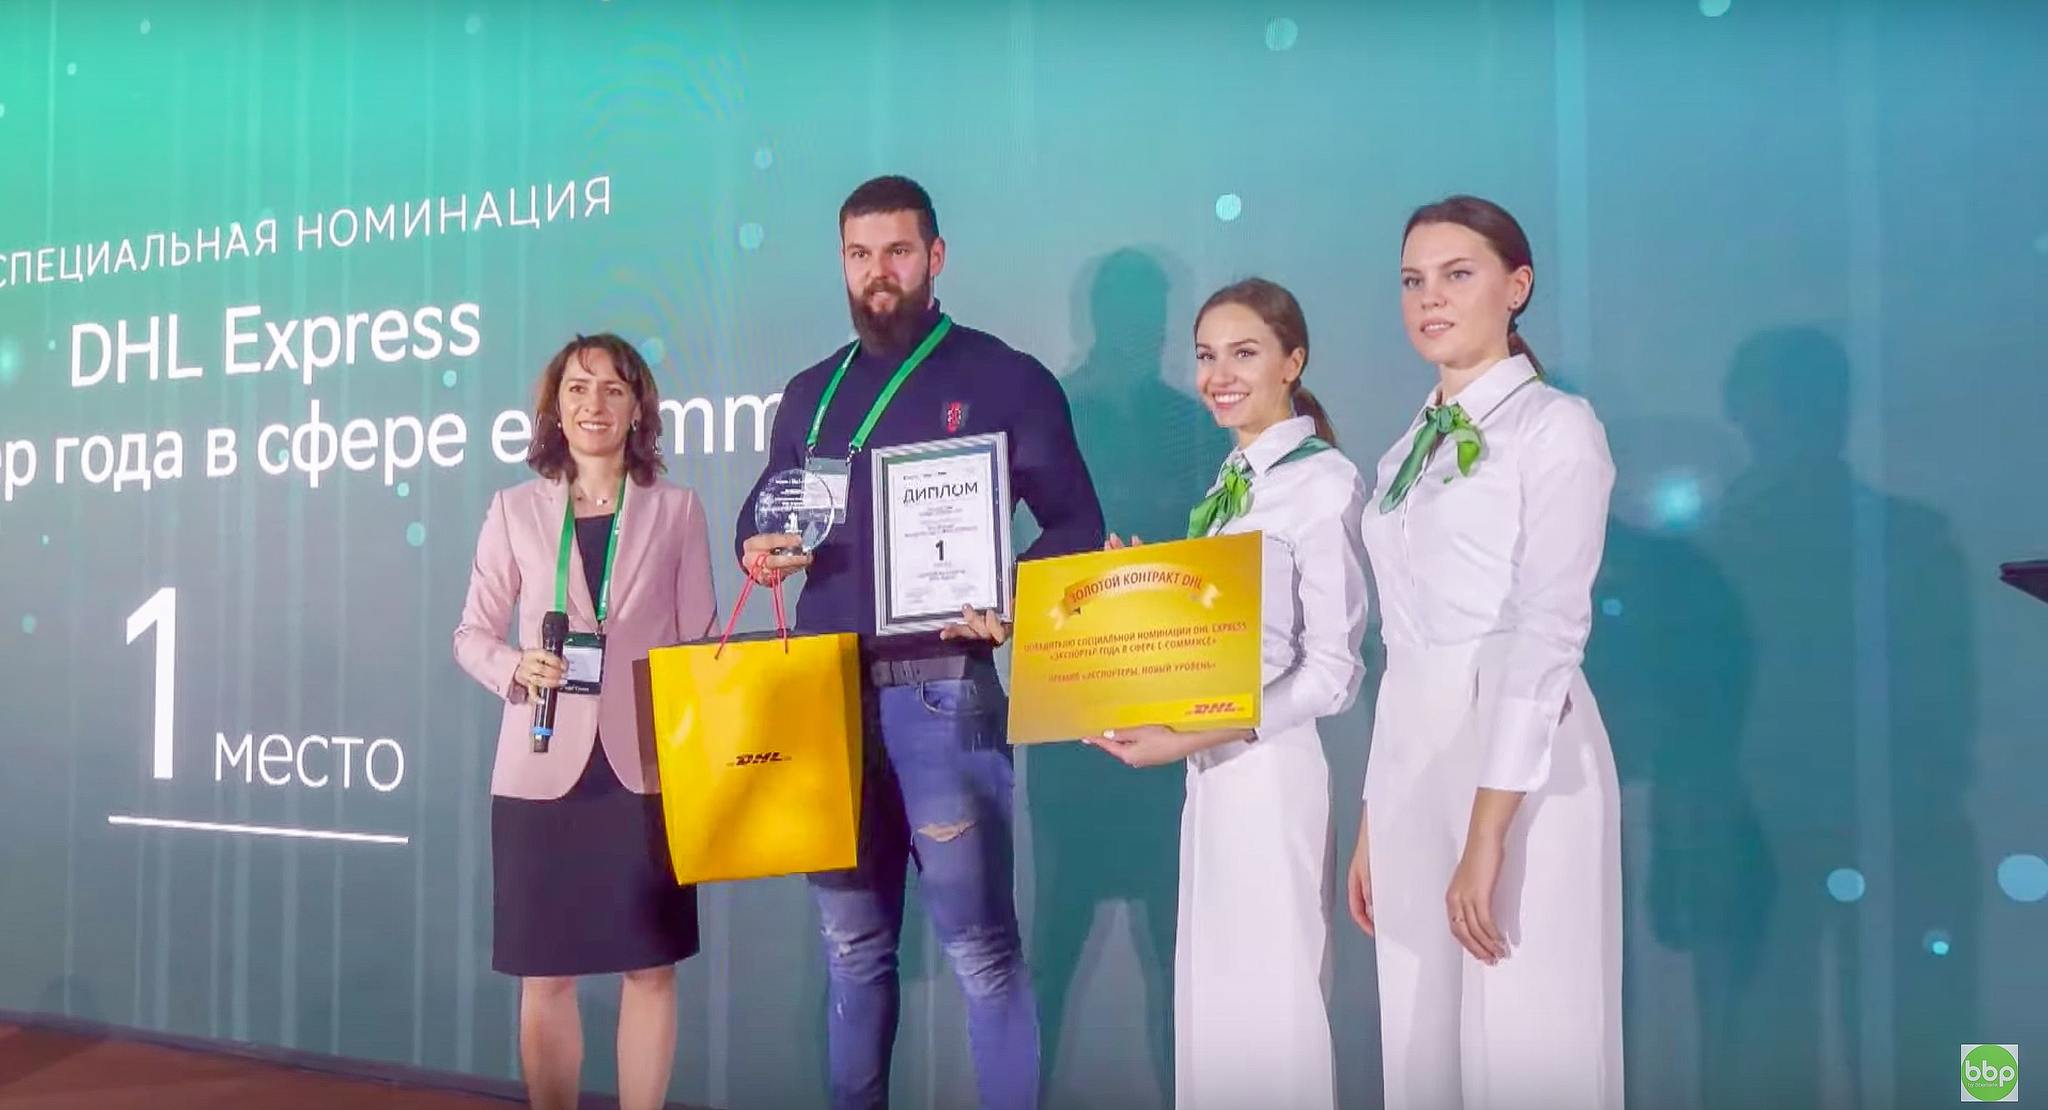 DHL and Sberbank awarded the best exporters of the Russian Federation